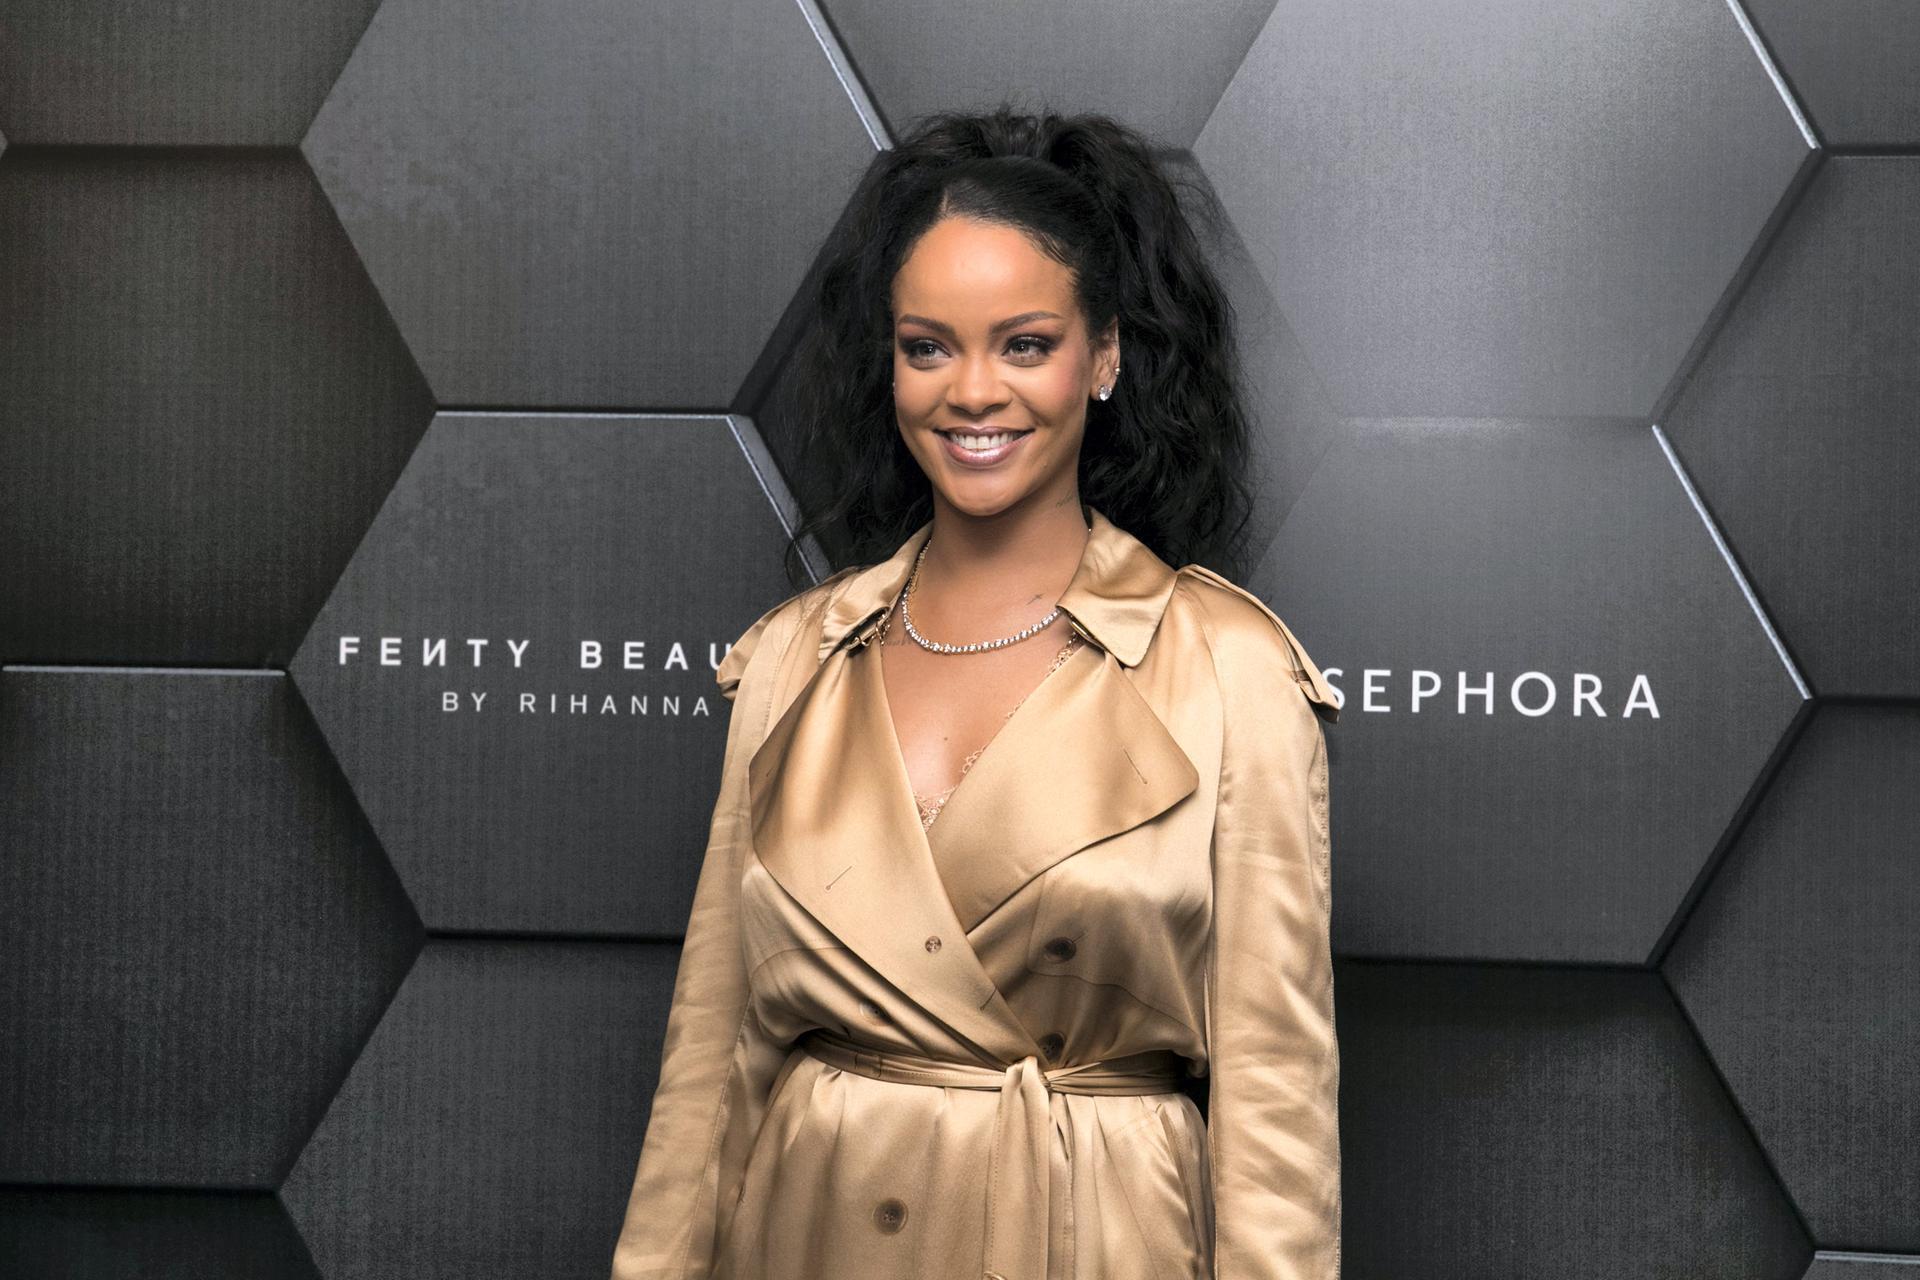 Rihanna announces the launch of Fenty Skin - here's what we know